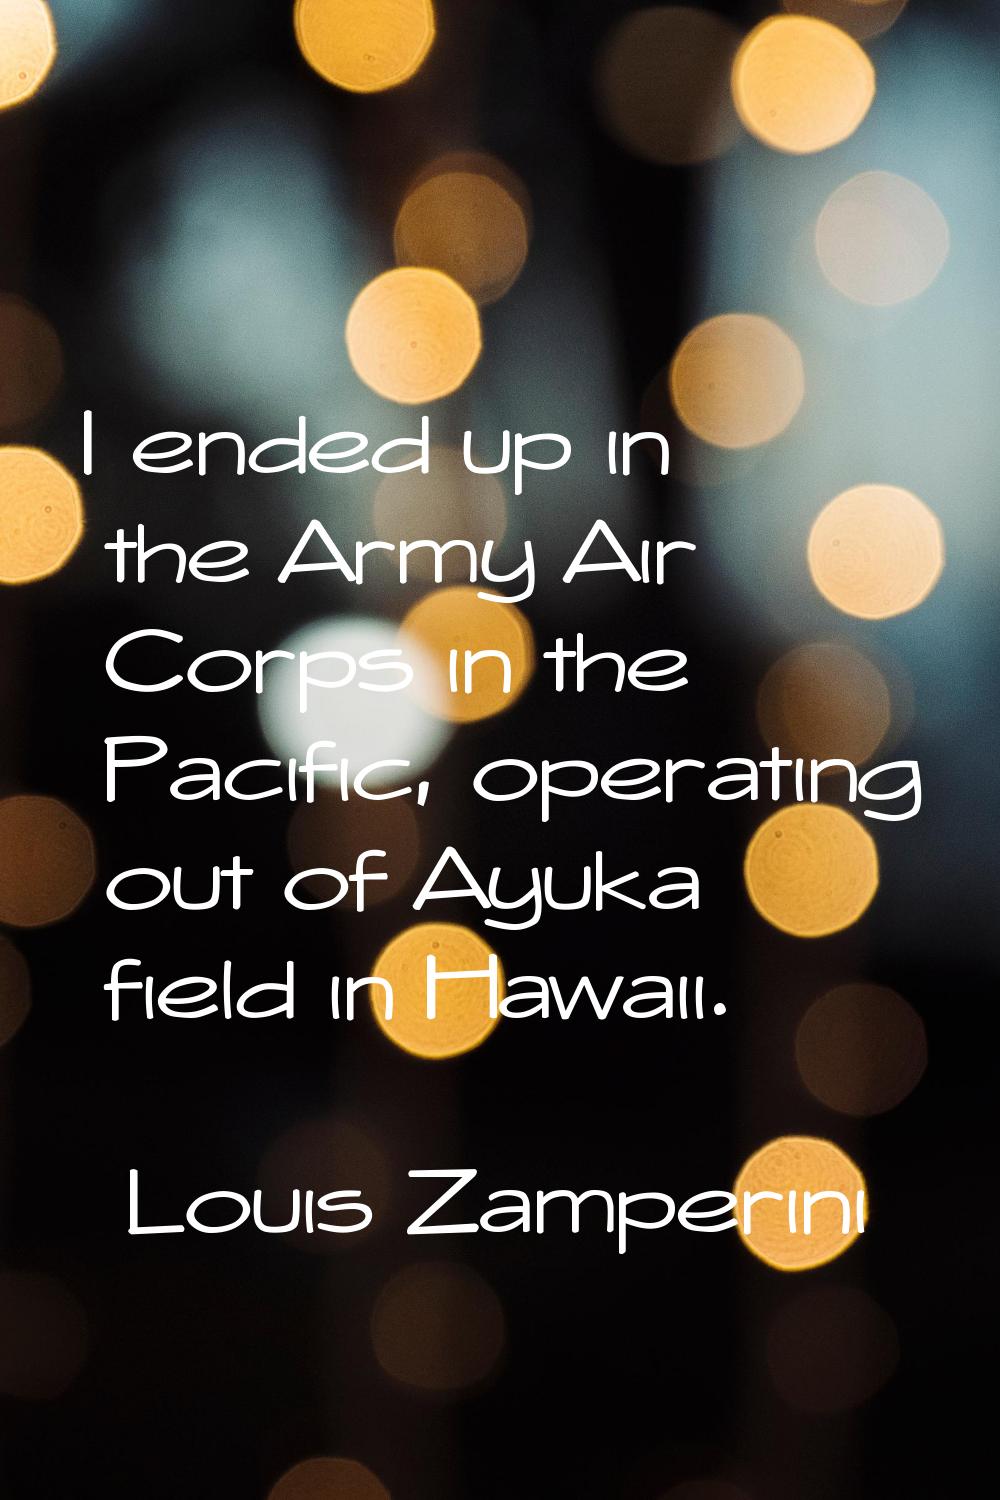 I ended up in the Army Air Corps in the Pacific, operating out of Ayuka field in Hawaii.